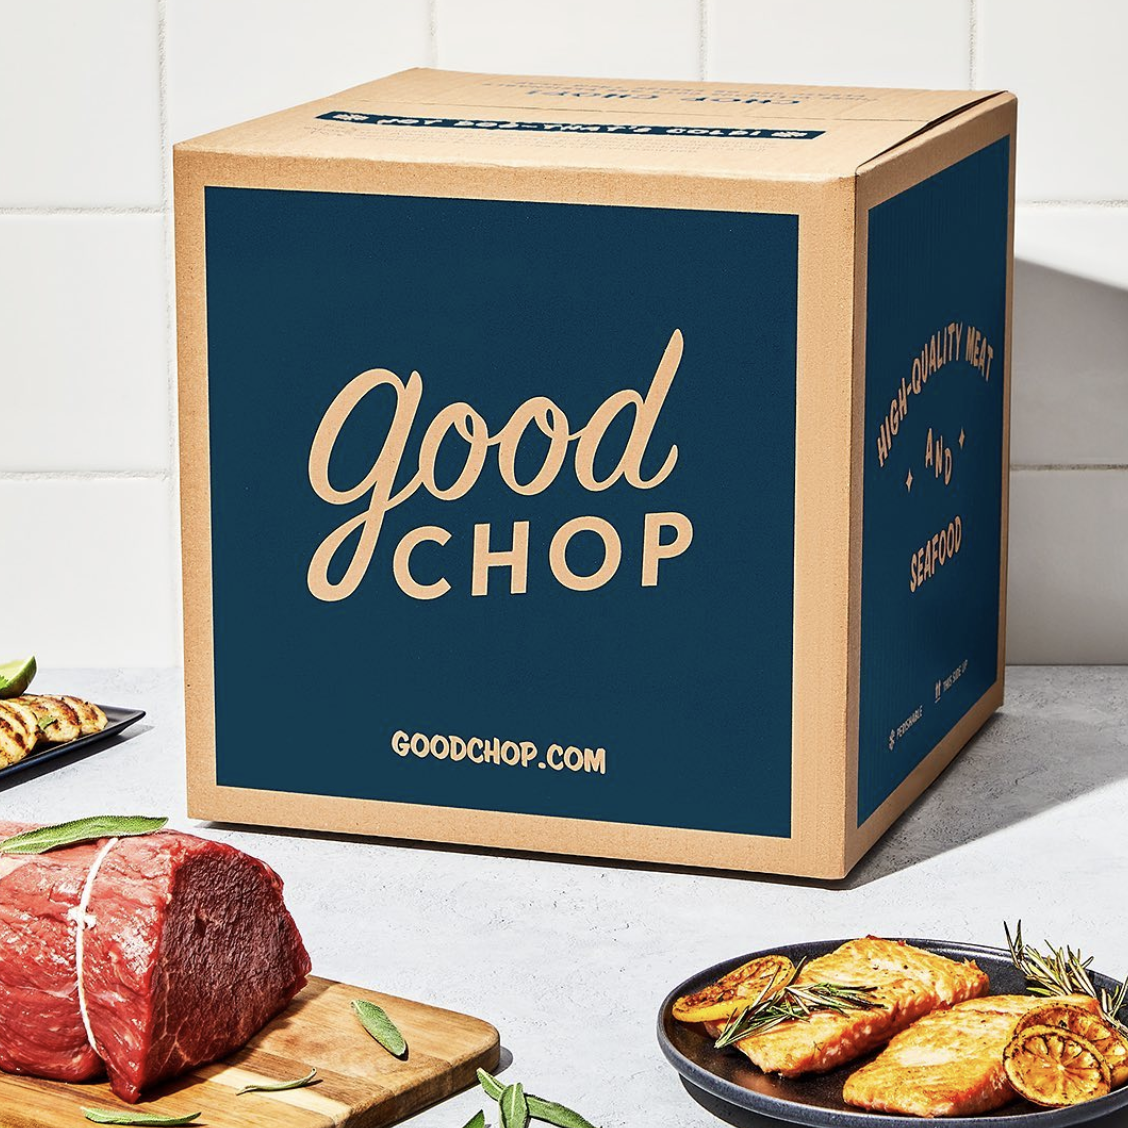 A Good Chop box with cuts of meat and fish next to it